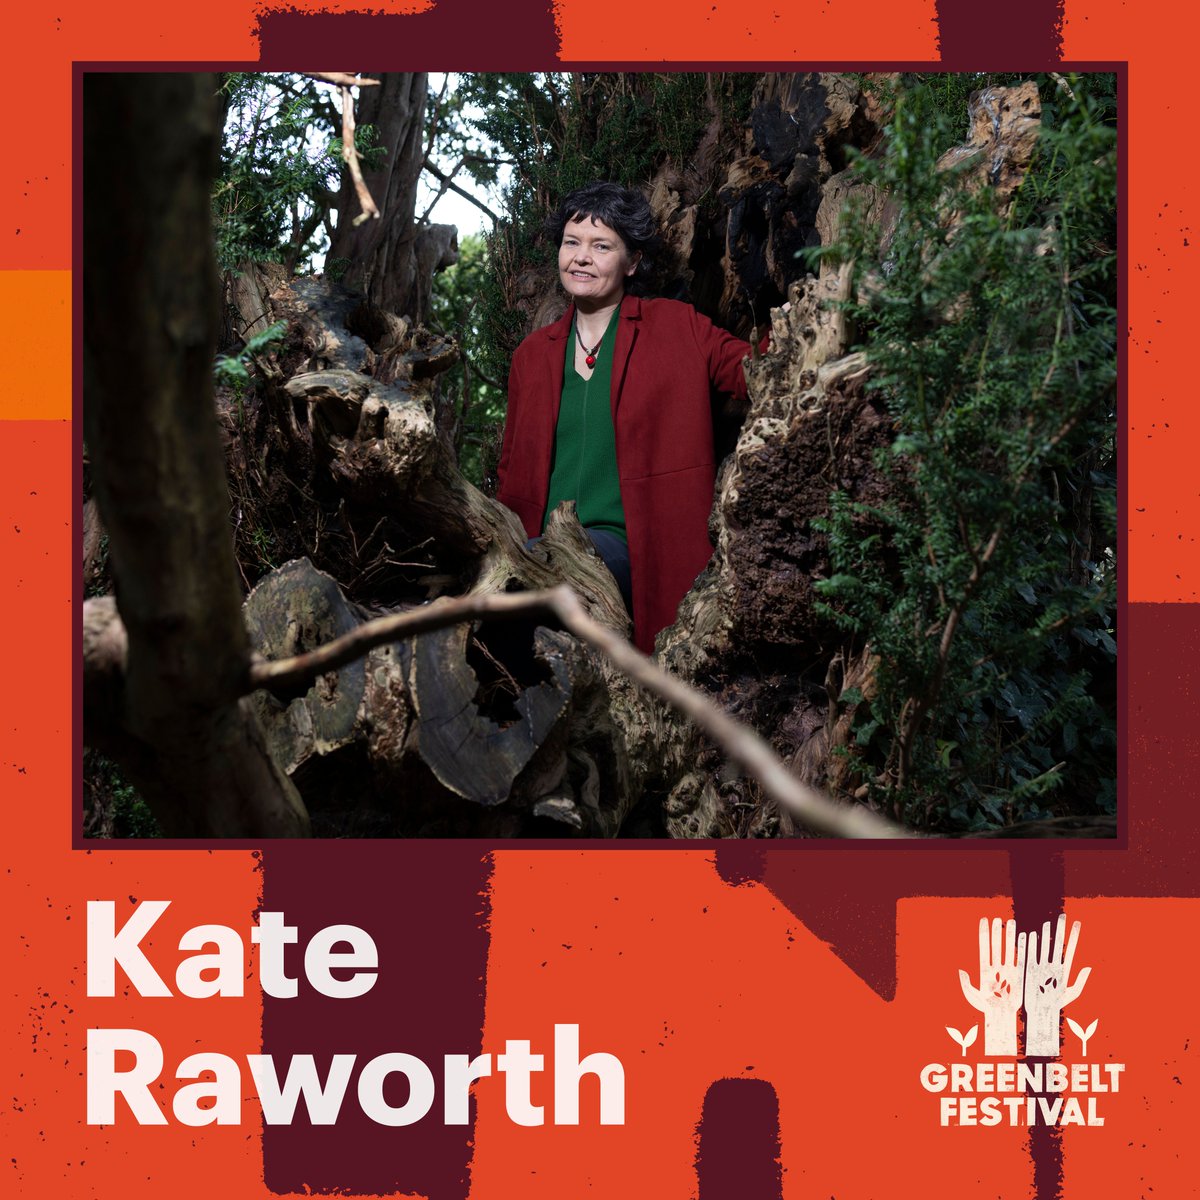 If you’ve seen @KateRaworth before (or if you haven’t), you won’t want to miss out at #GB24. Kate is a renegade ecological economist, committed to the rewiring of economics. She’s taking part in an interactive ‘We need to talk about growth’ session in our Hot House venue.